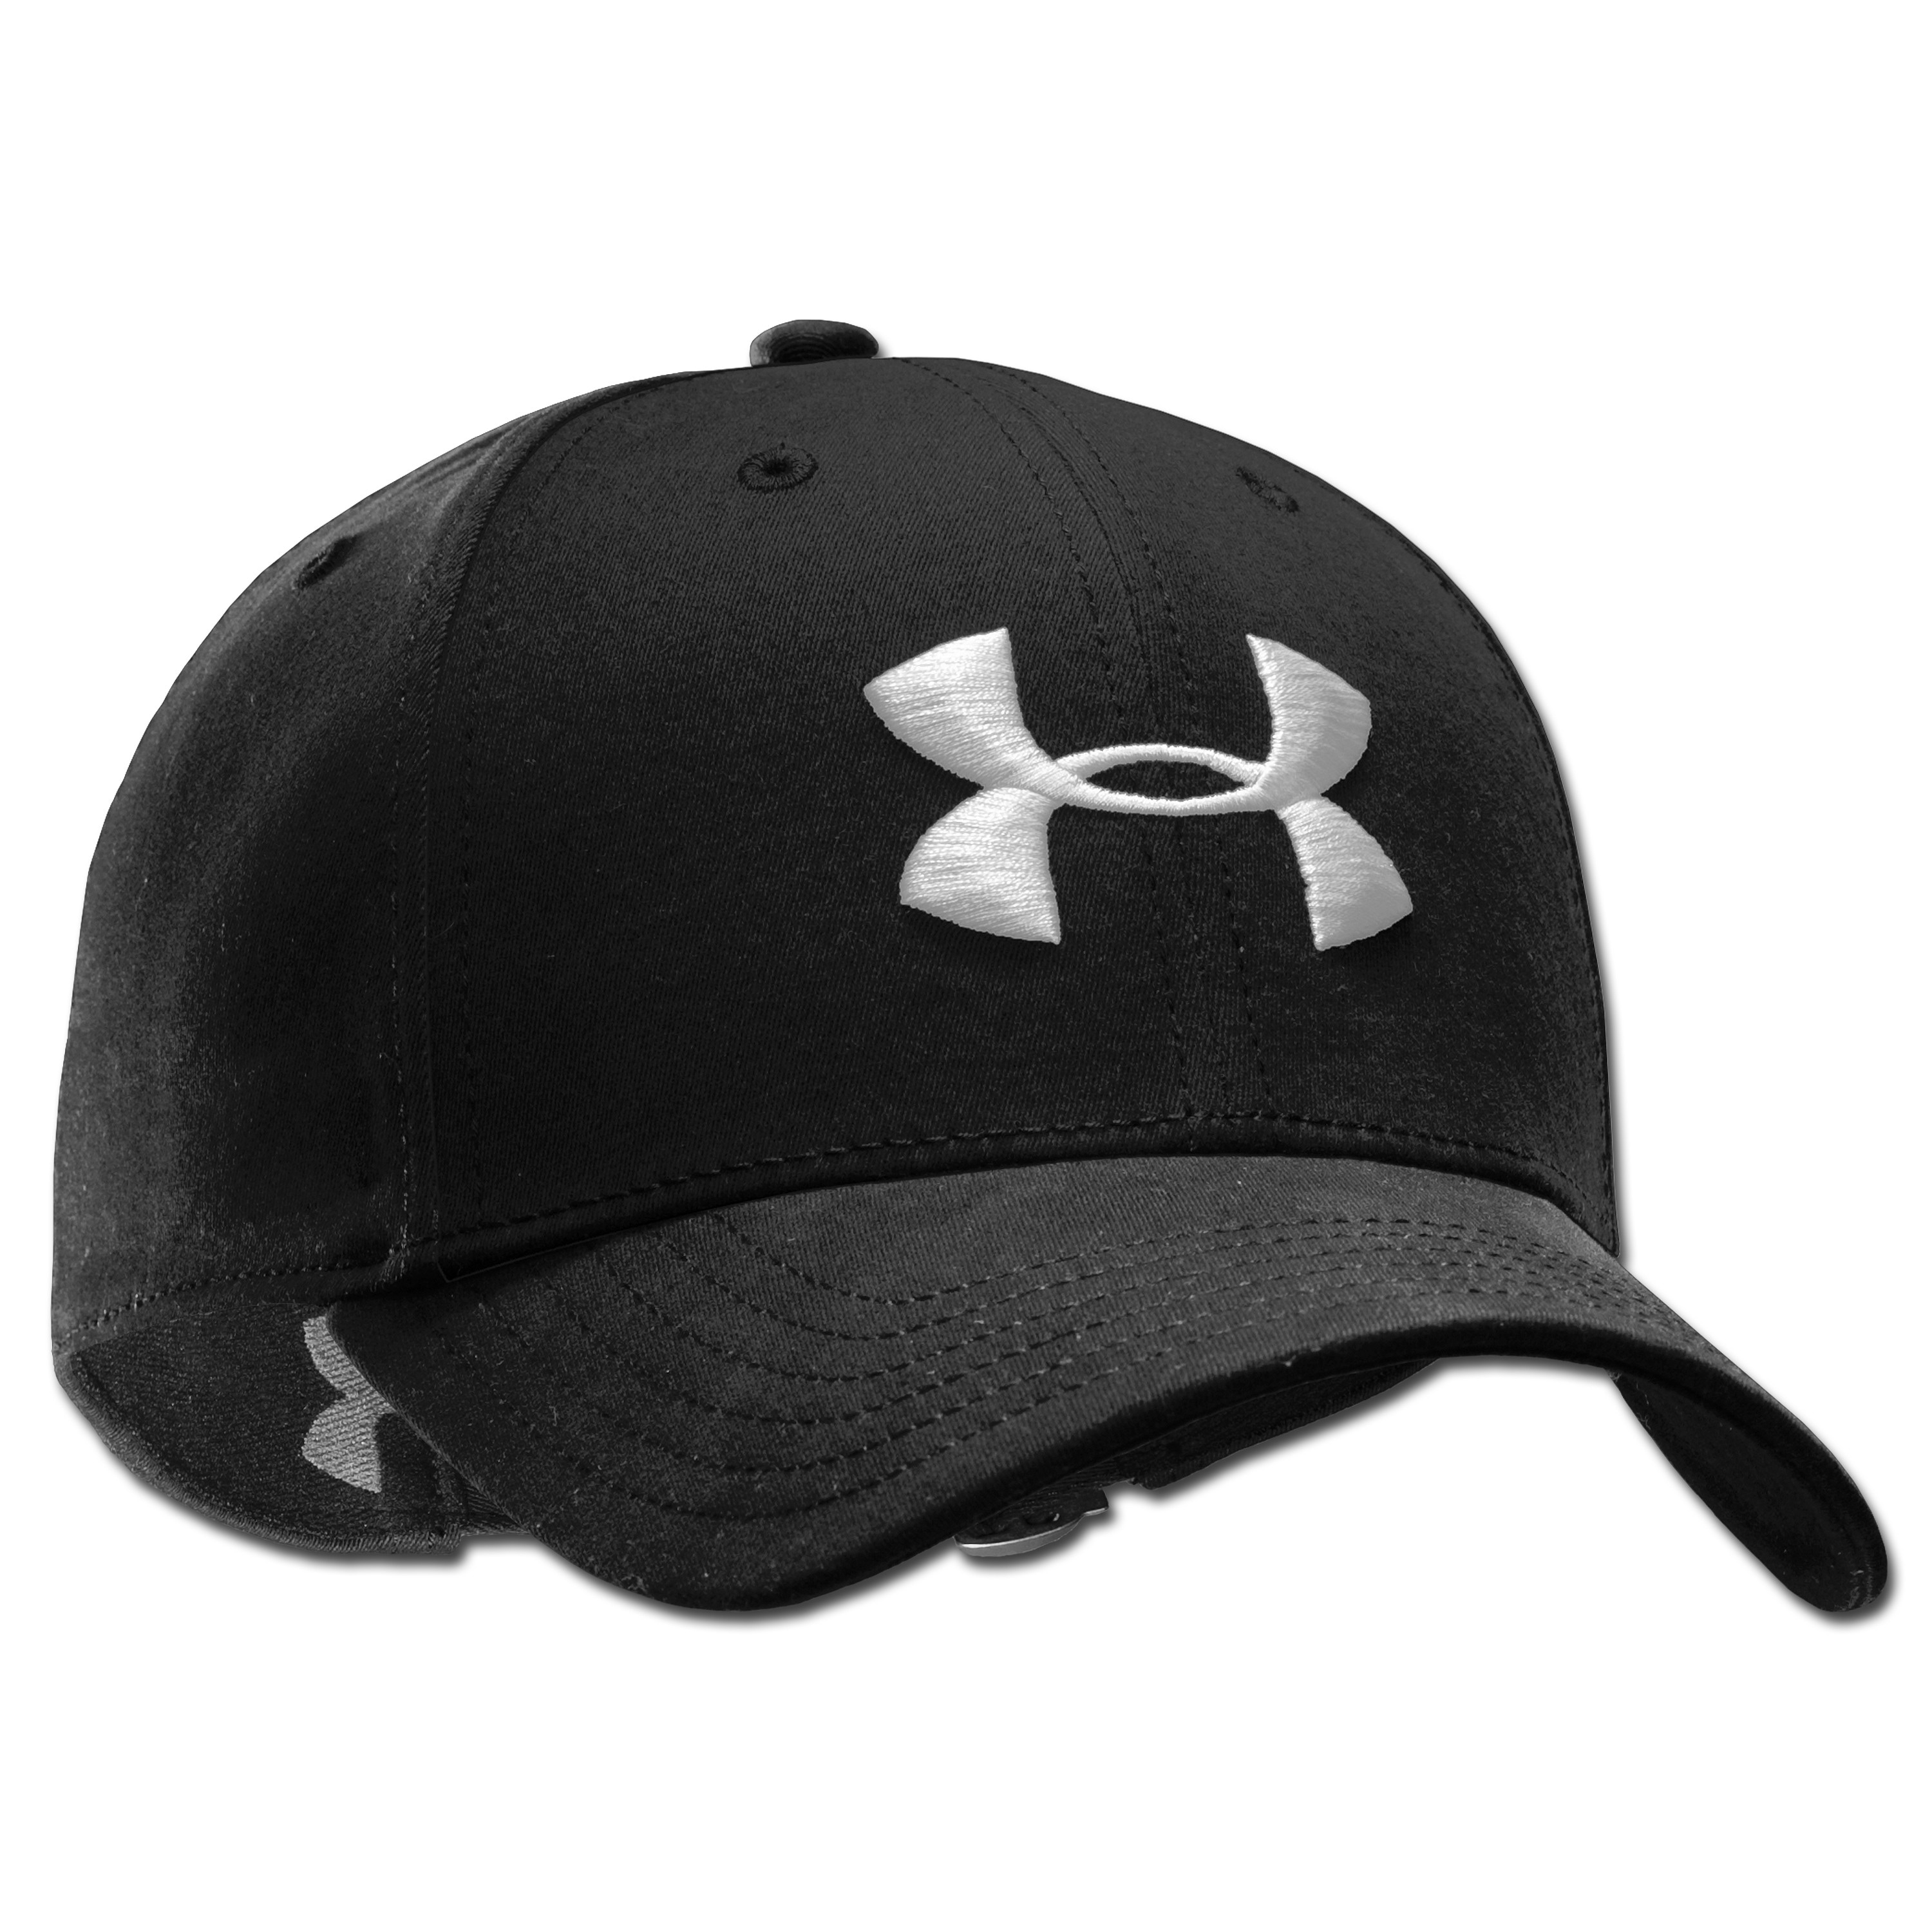 Under Armour Washed Adjustable Cap 